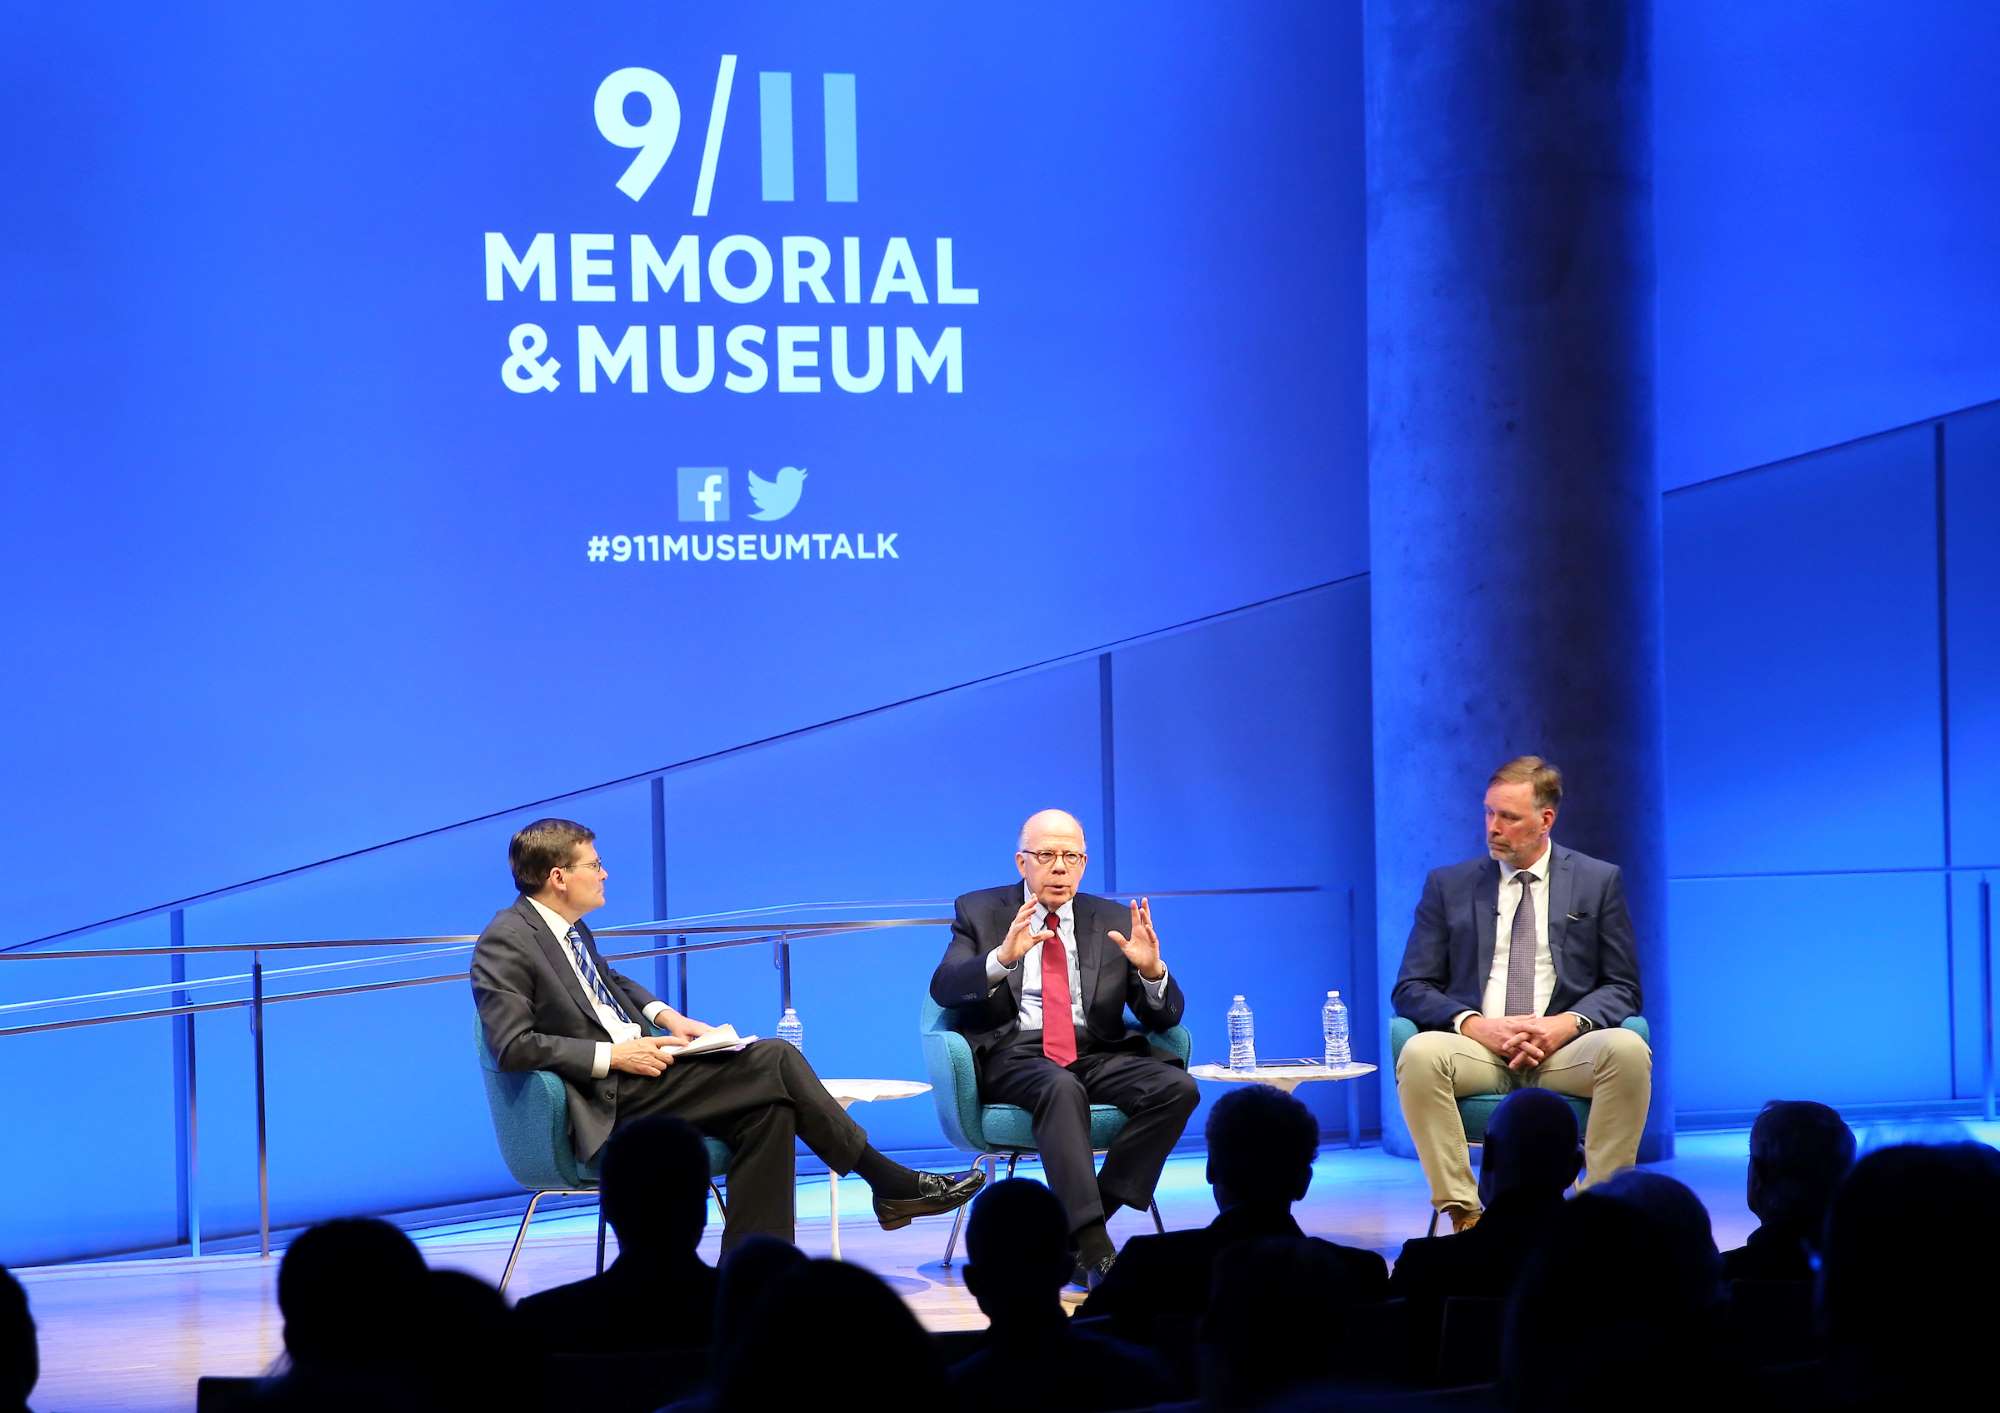 Former Acting CIA Directors John McLaughlin and Michael Morell and former CIA Senior Paramilitary Officer Phil Reilly sit beside each other onstage in this wide angle photo of the Museum Auditorium. McLaughlin is seated between the other two men and gesturing with both hands as he speaks to the audience. Members of the audience are seated in the foreground. Their figures are silhouetted by the bright blue lights behind the stage. The 9/11 Memorial & Museum logo is displayed on a wall above the three partici